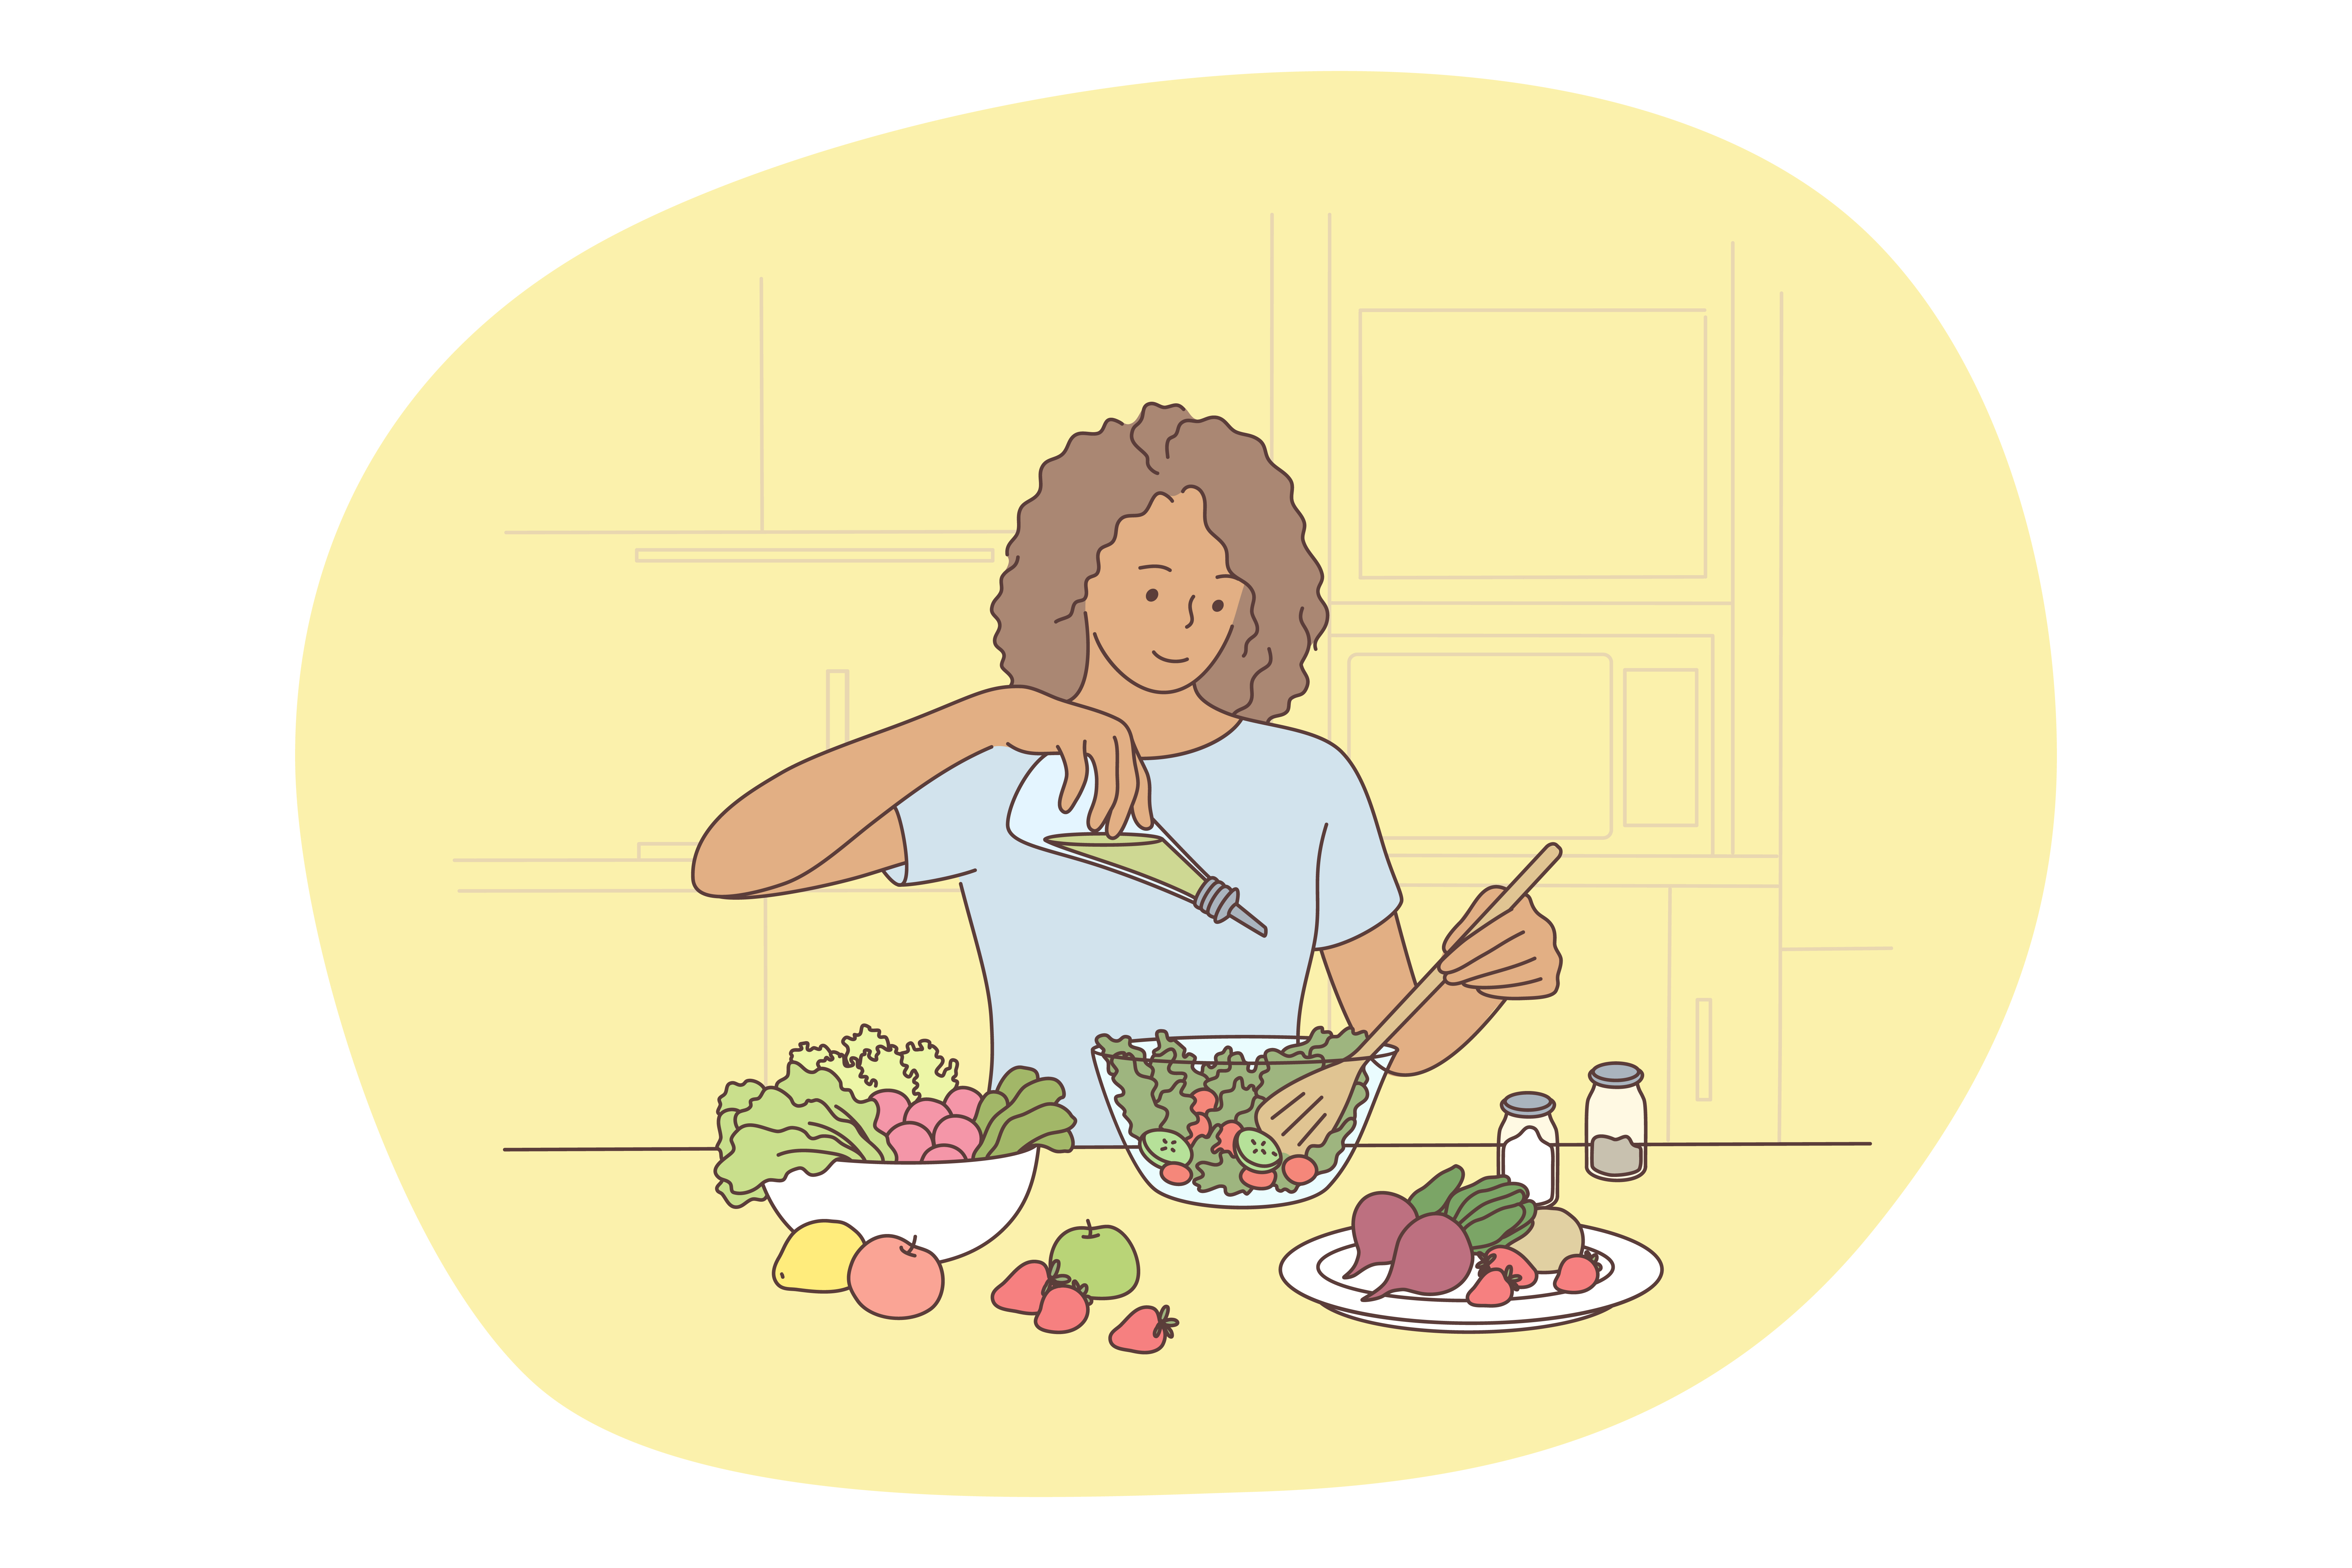 Healthy food, clean eating, nutrition concept. Young positive woman cartoon character cooking fresh healthy salad from ripe farm vegetables in kitchen. Wellness, bodycare, vegetarian lifestyle . Healthy food, clean eating, nutrition concept